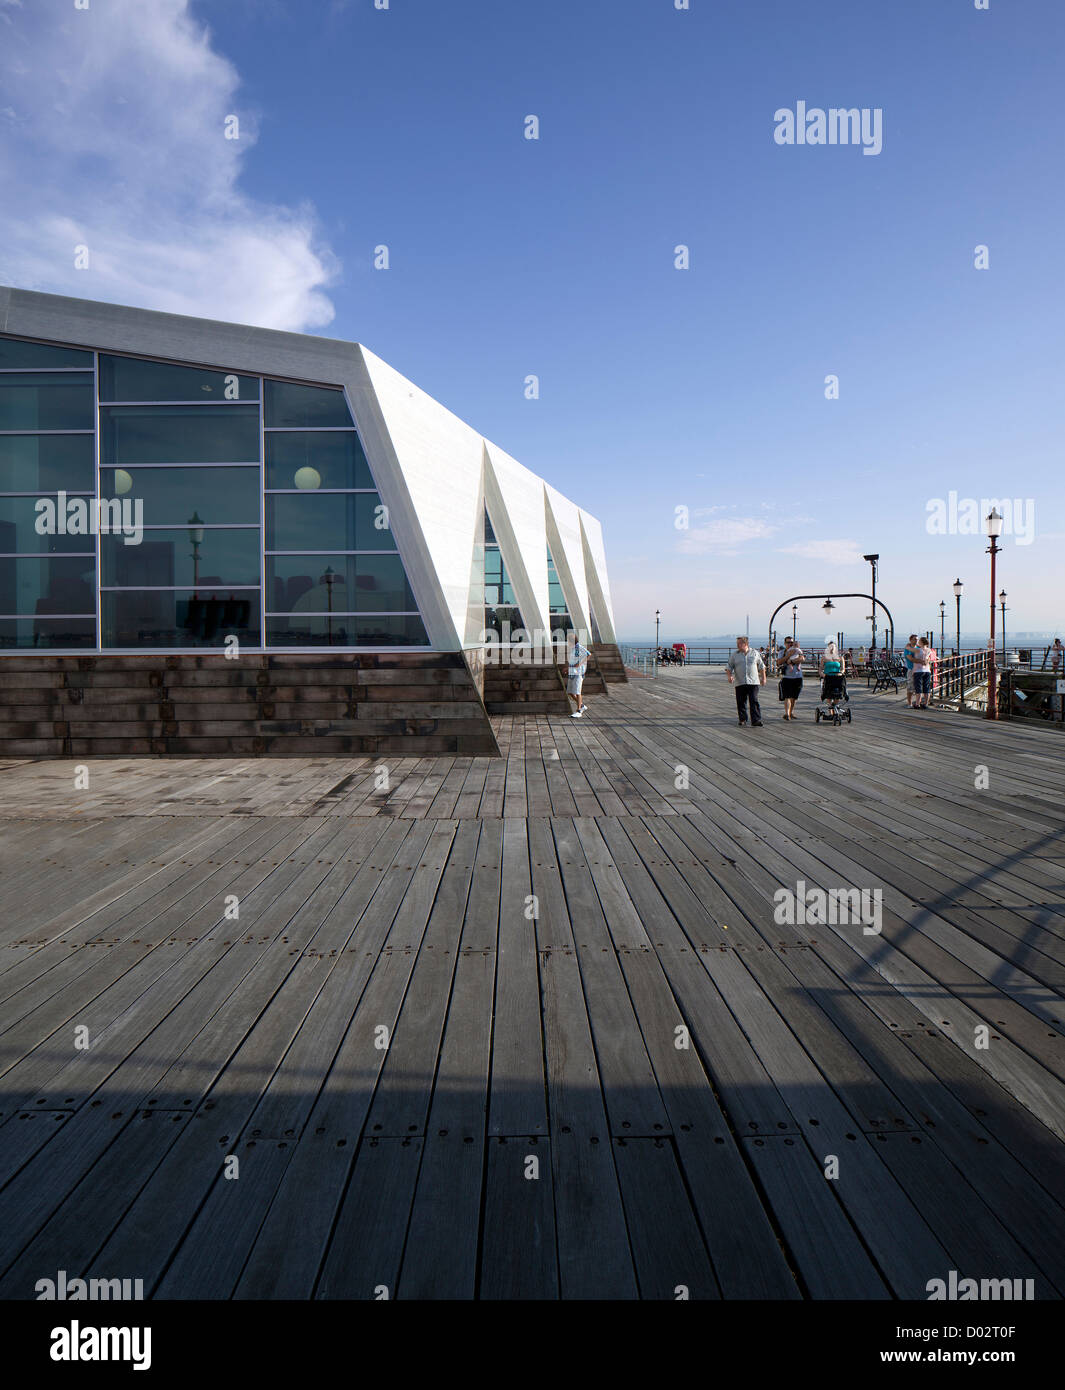 Southend Pier Cultural Centre, Southend, United Kingdom. Architect: White Architects, 2012. Exterior looking towards the estuary Stock Photo